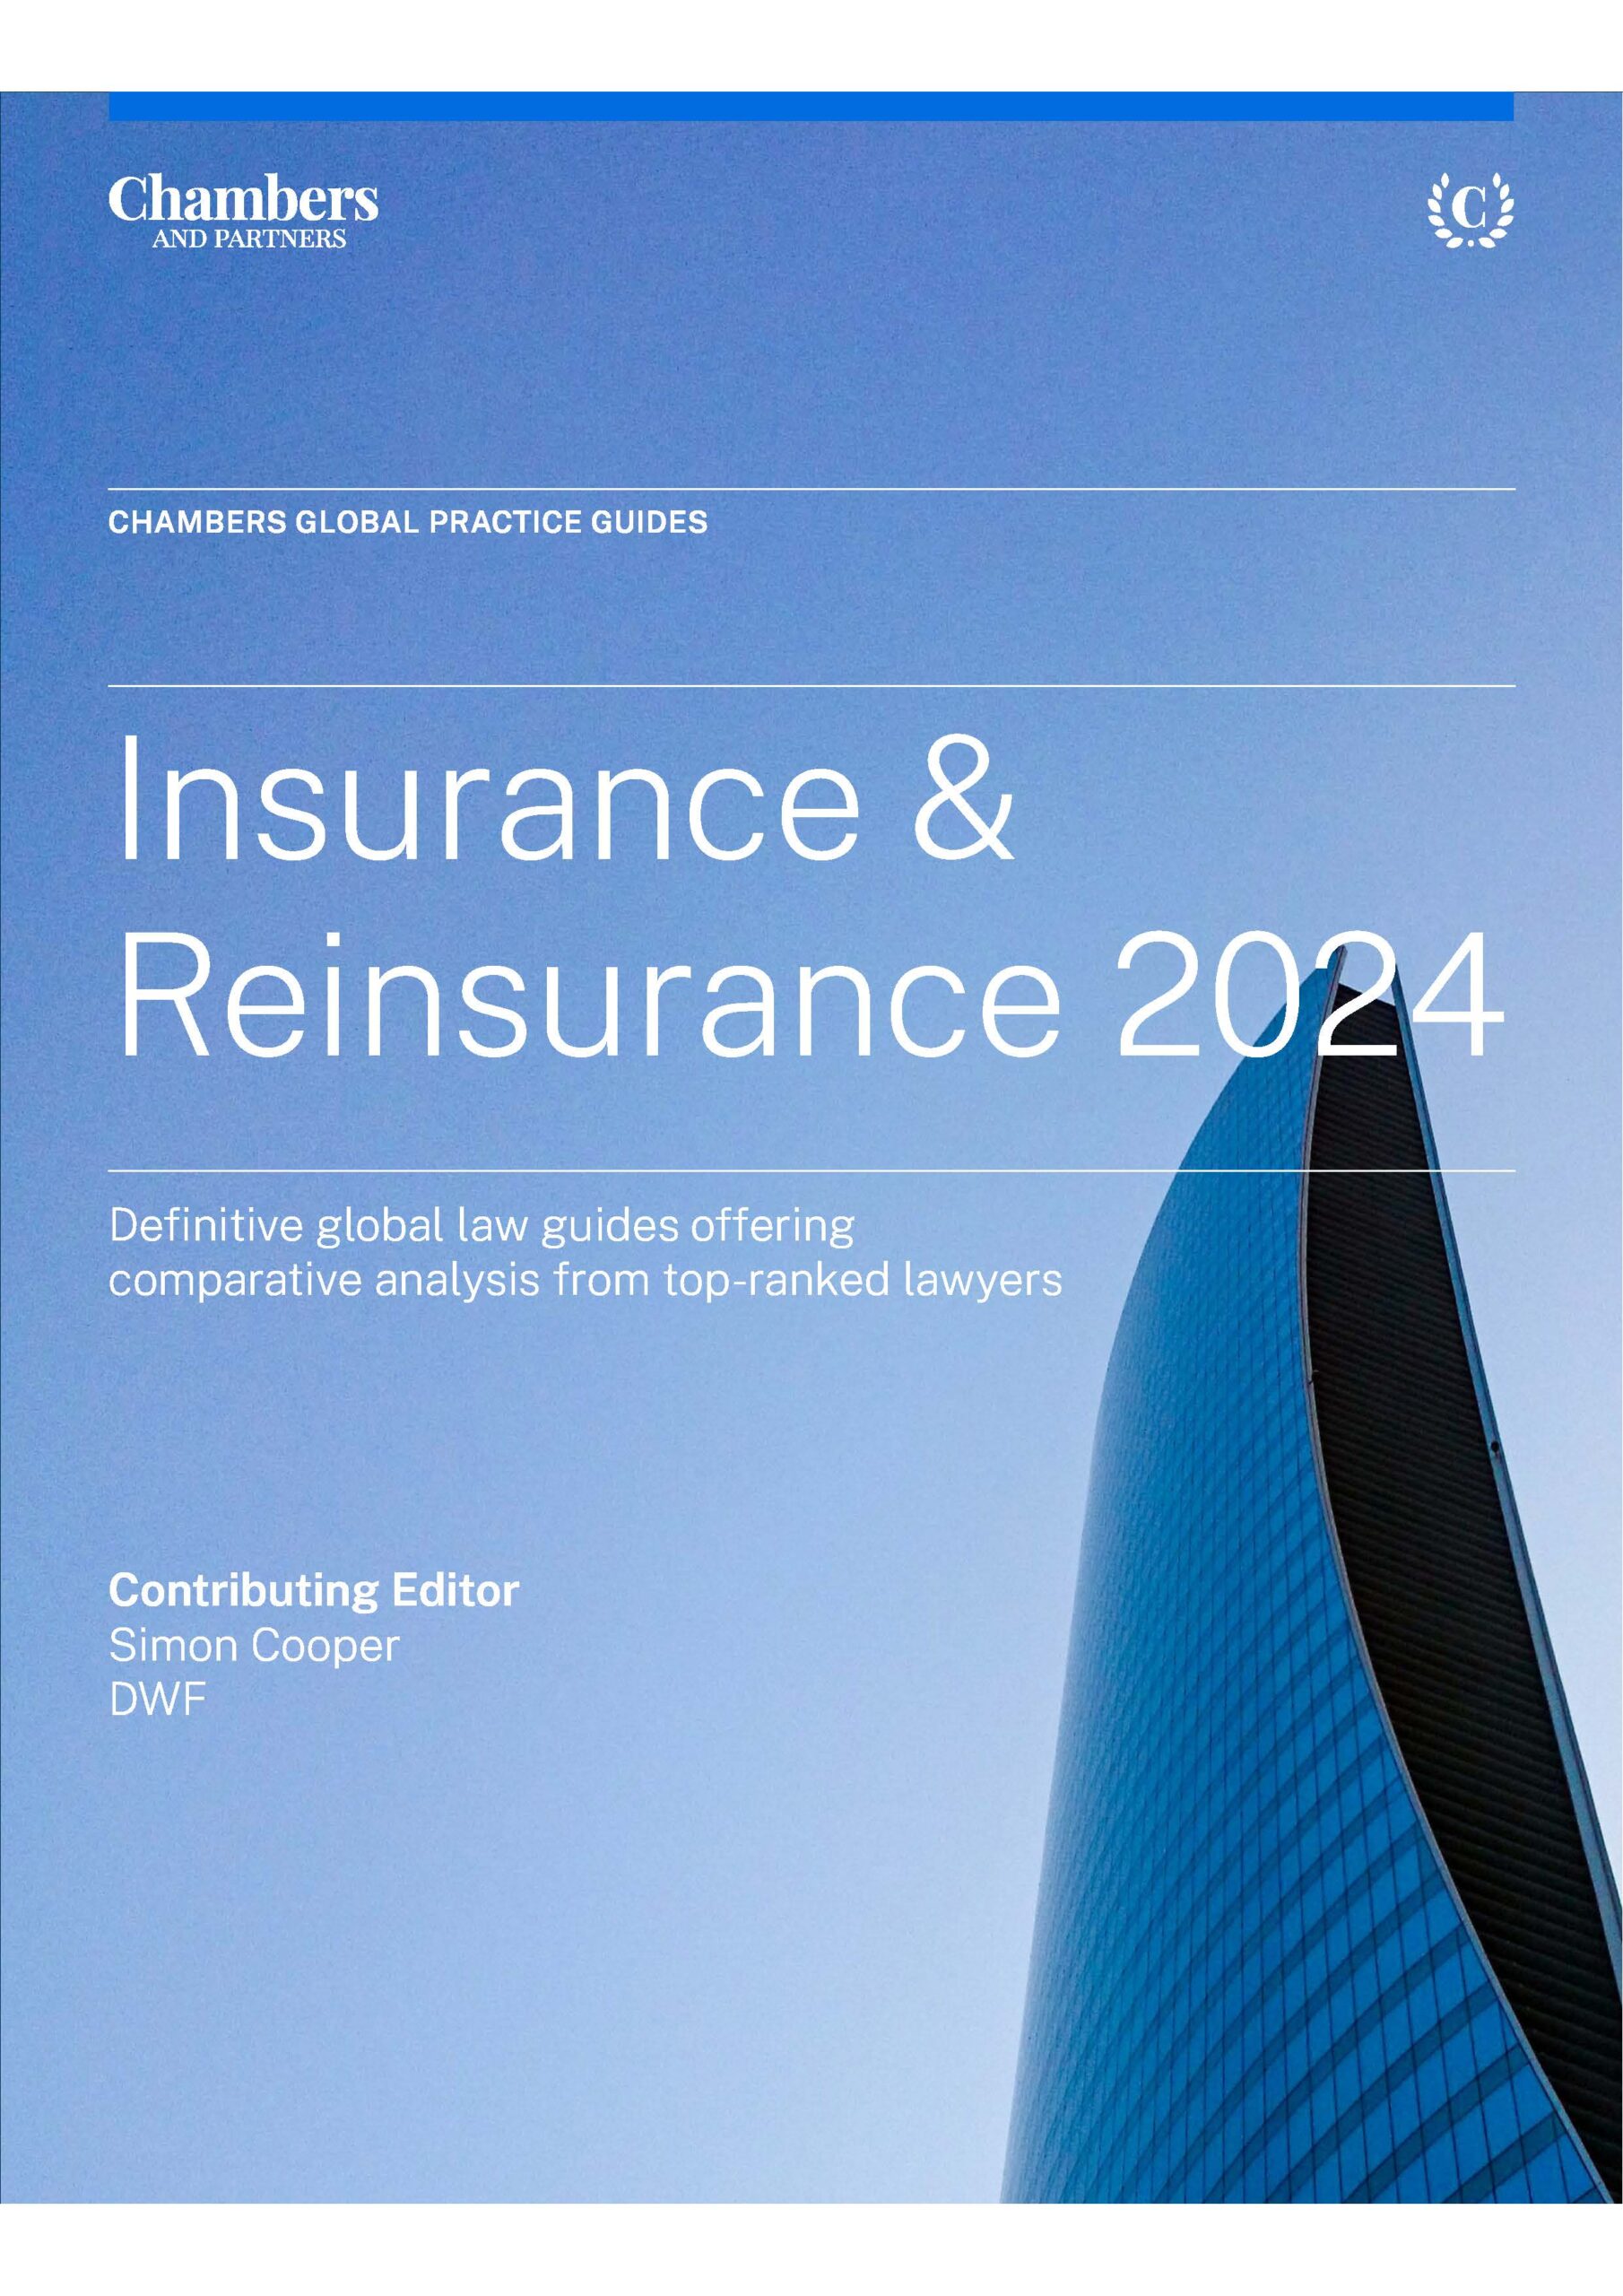 Chambers Global Practice Guides: Insurance & Reinsurance – Japan – Law and Practice 2024